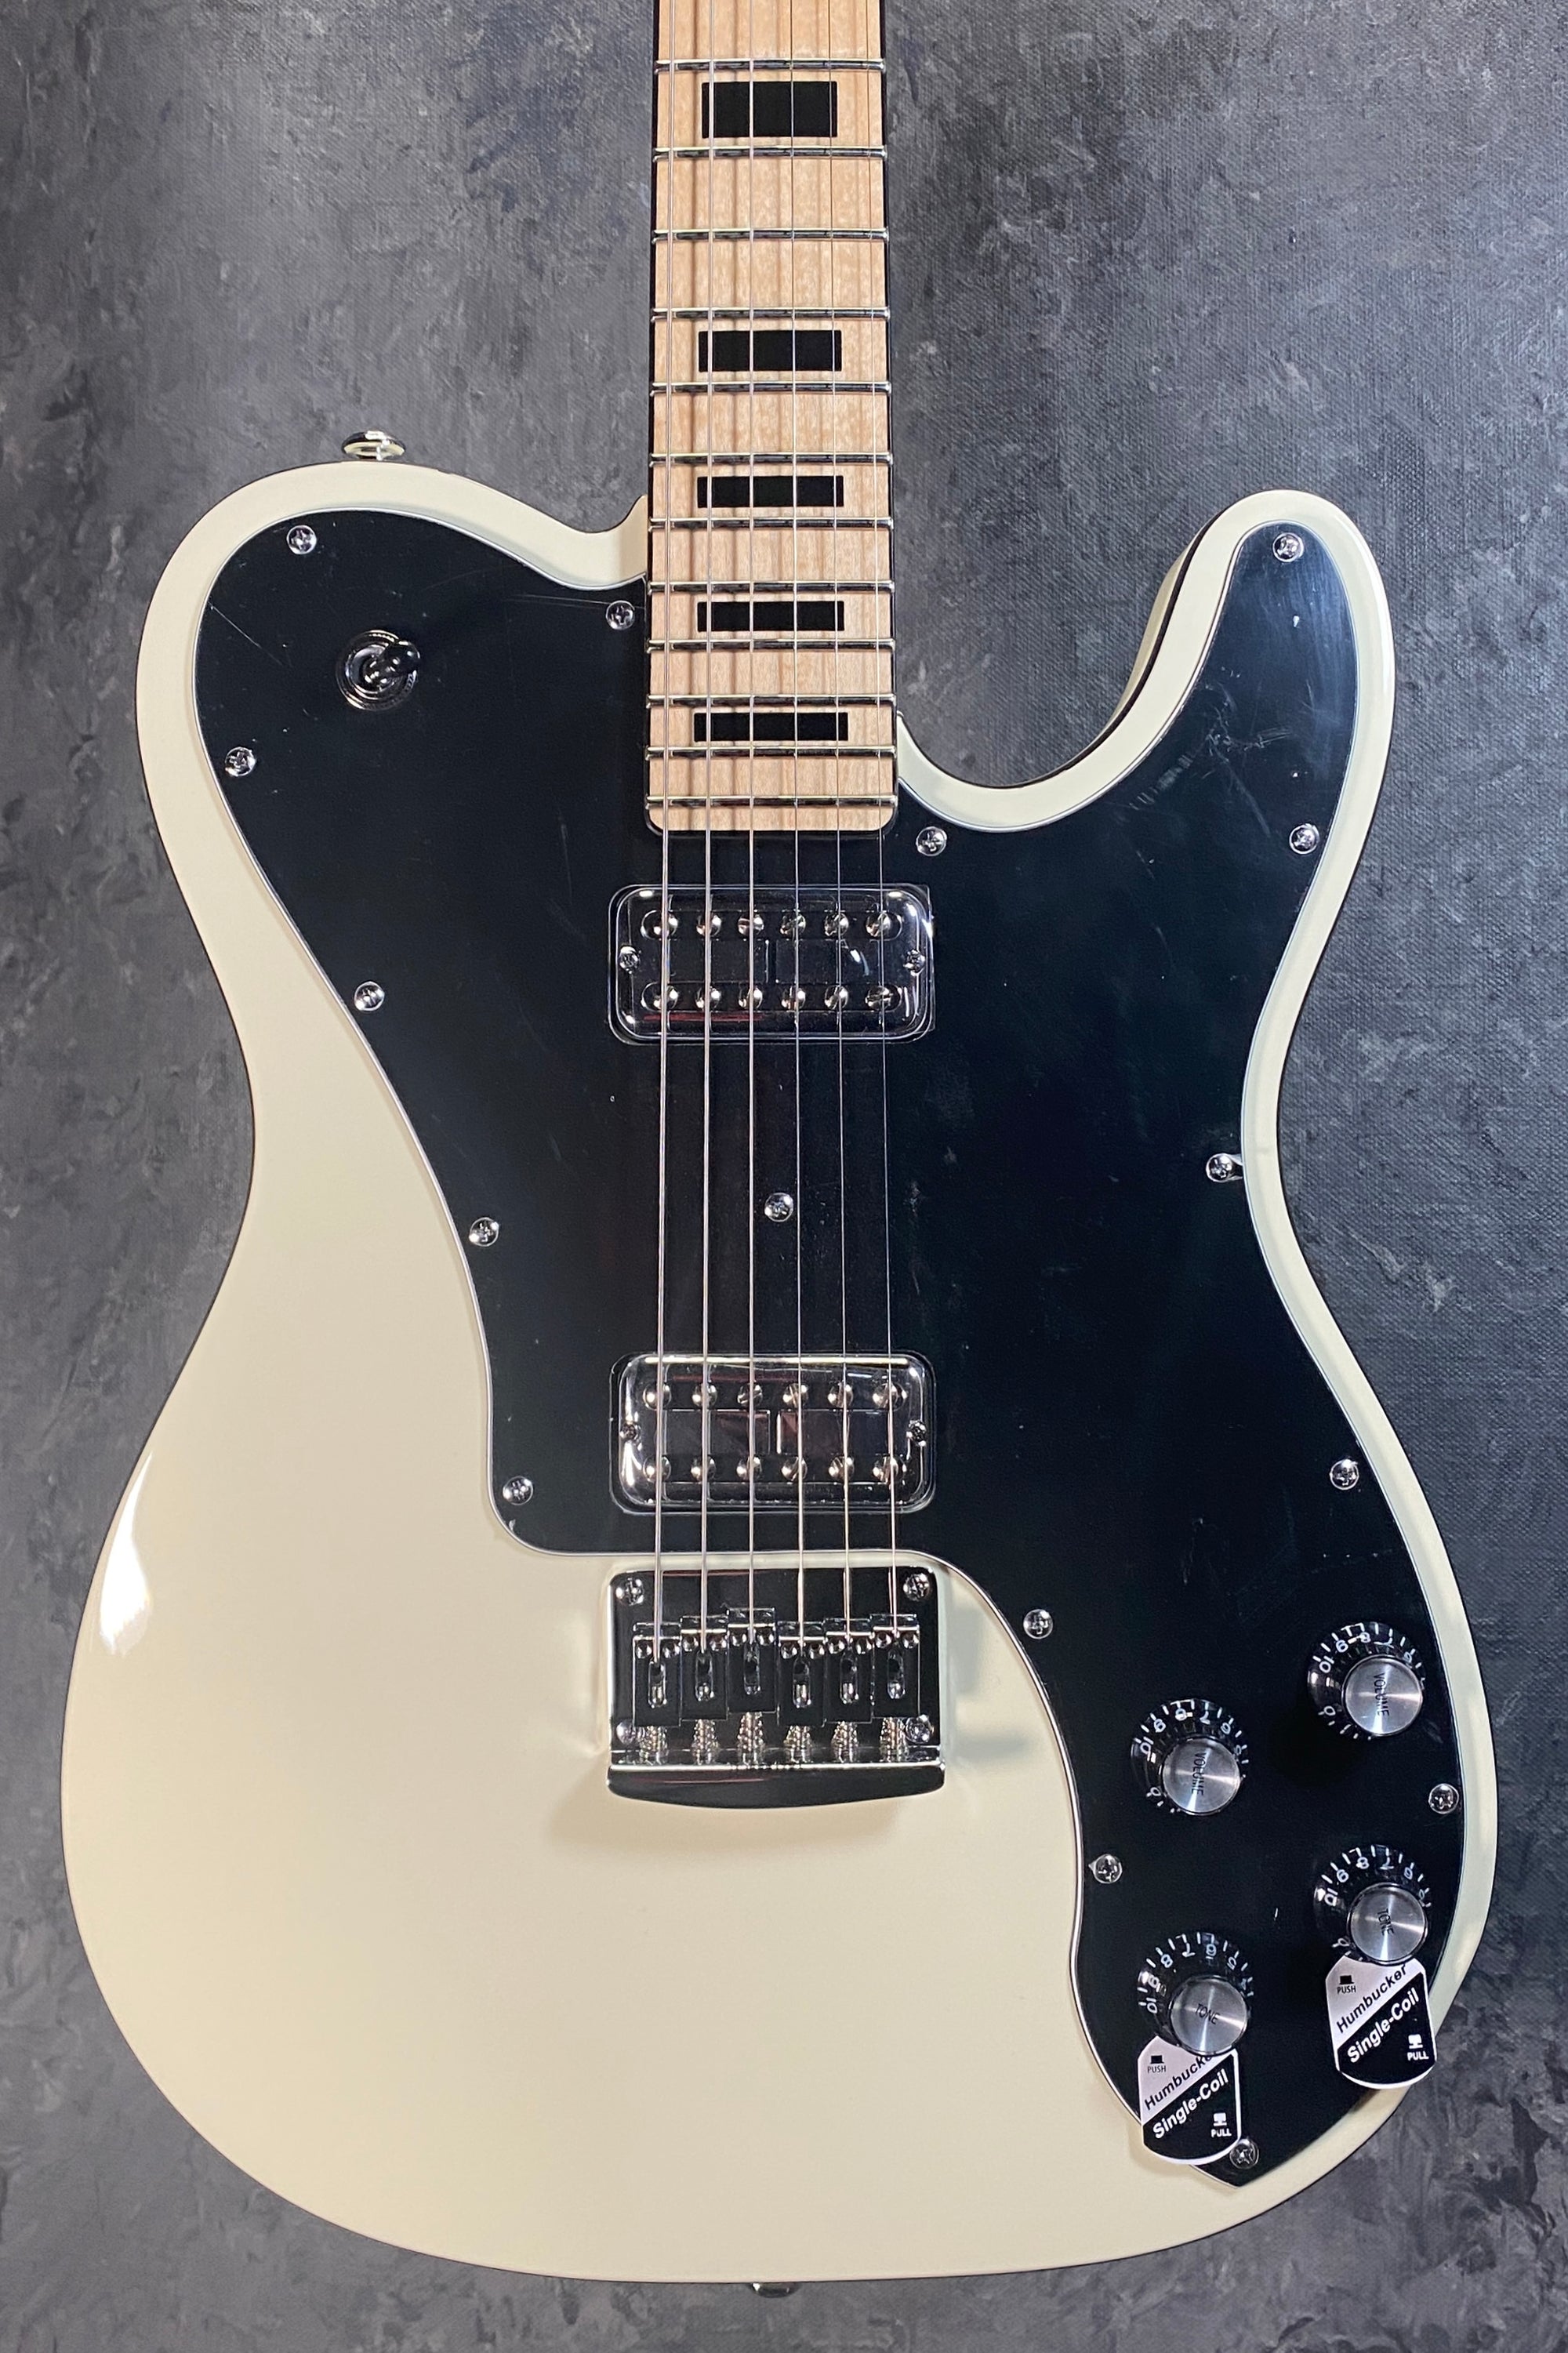 Schecter Pt Fastback Electric Guitar in Olympic White 2146-SHC